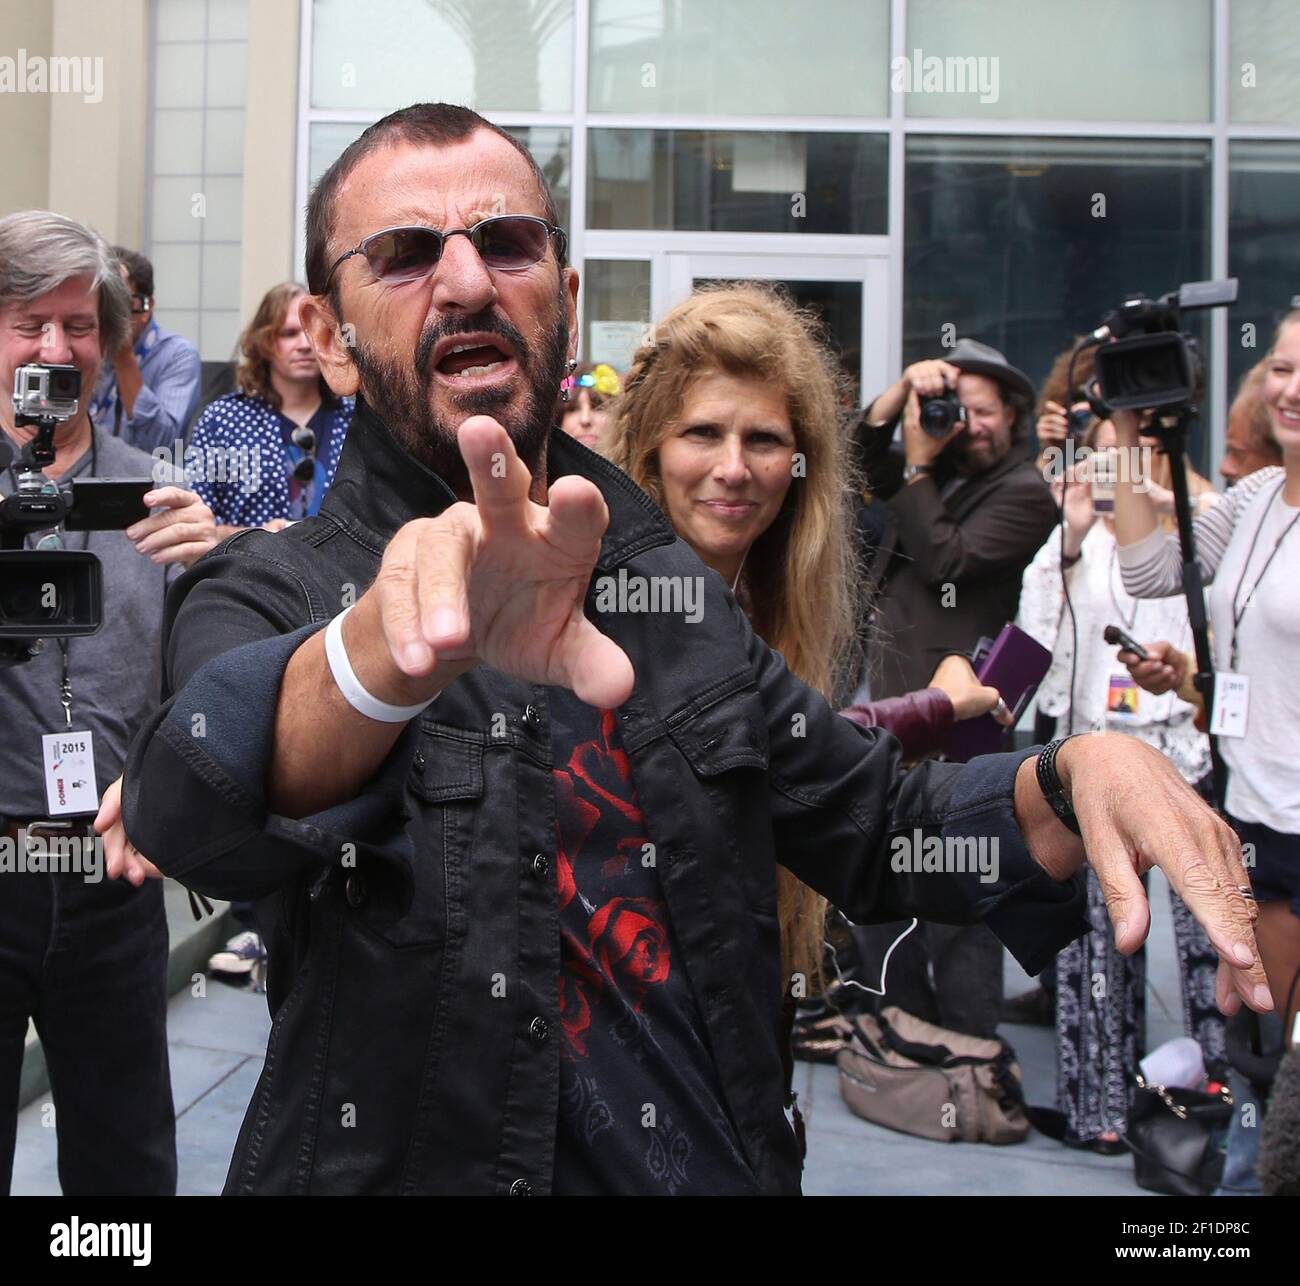 07 July 2015 - Hollywood, California - Ringo Starr attends his 75th birthday fan gathering at Capitol Records. Photo Credit: F. Sadou/AdMedia *** Please Use Credit from Credit Field *** Stock Photo